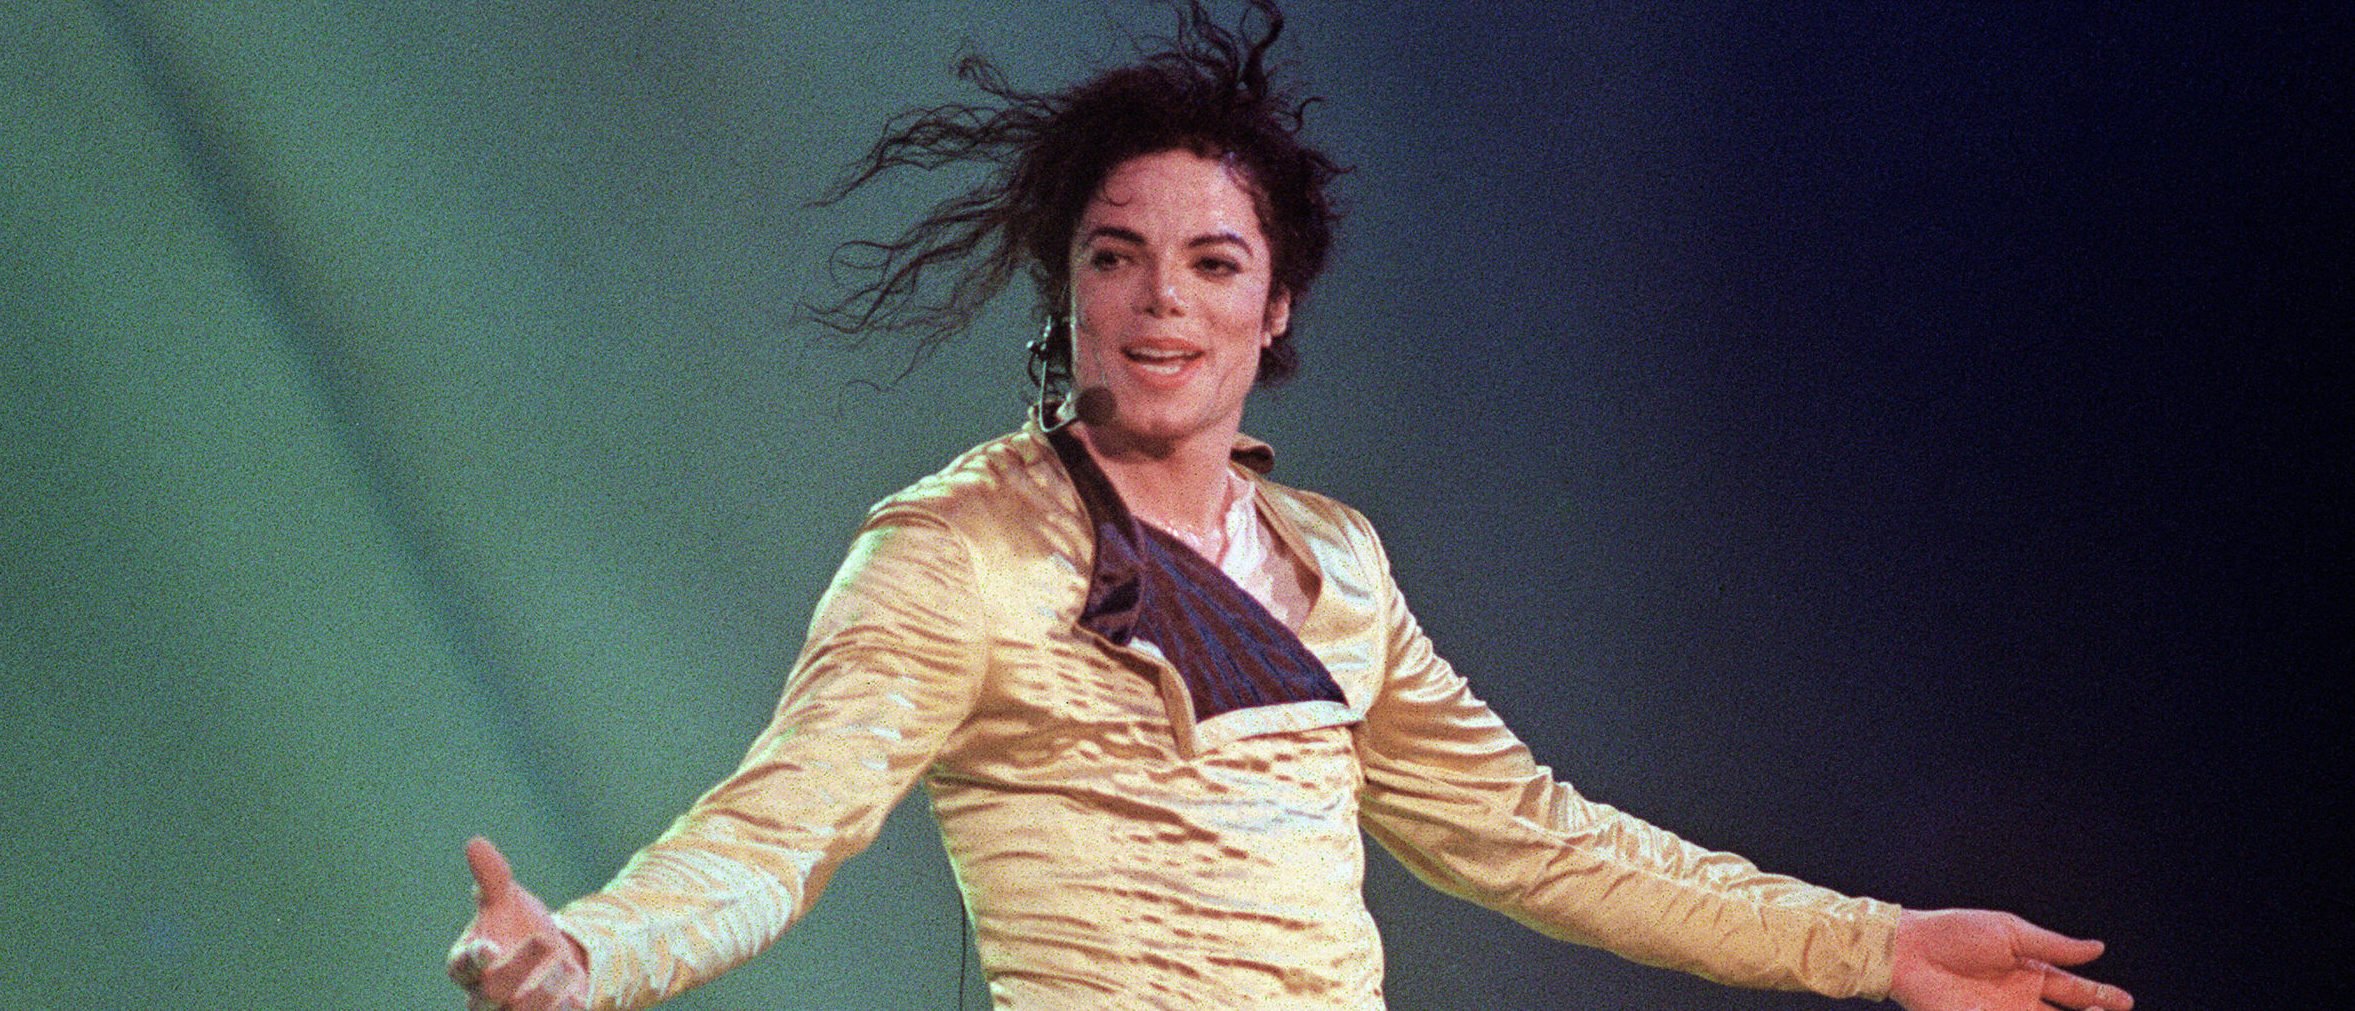 Sony Buys Stake In Michael Jackson’s Catalog For $600 Million